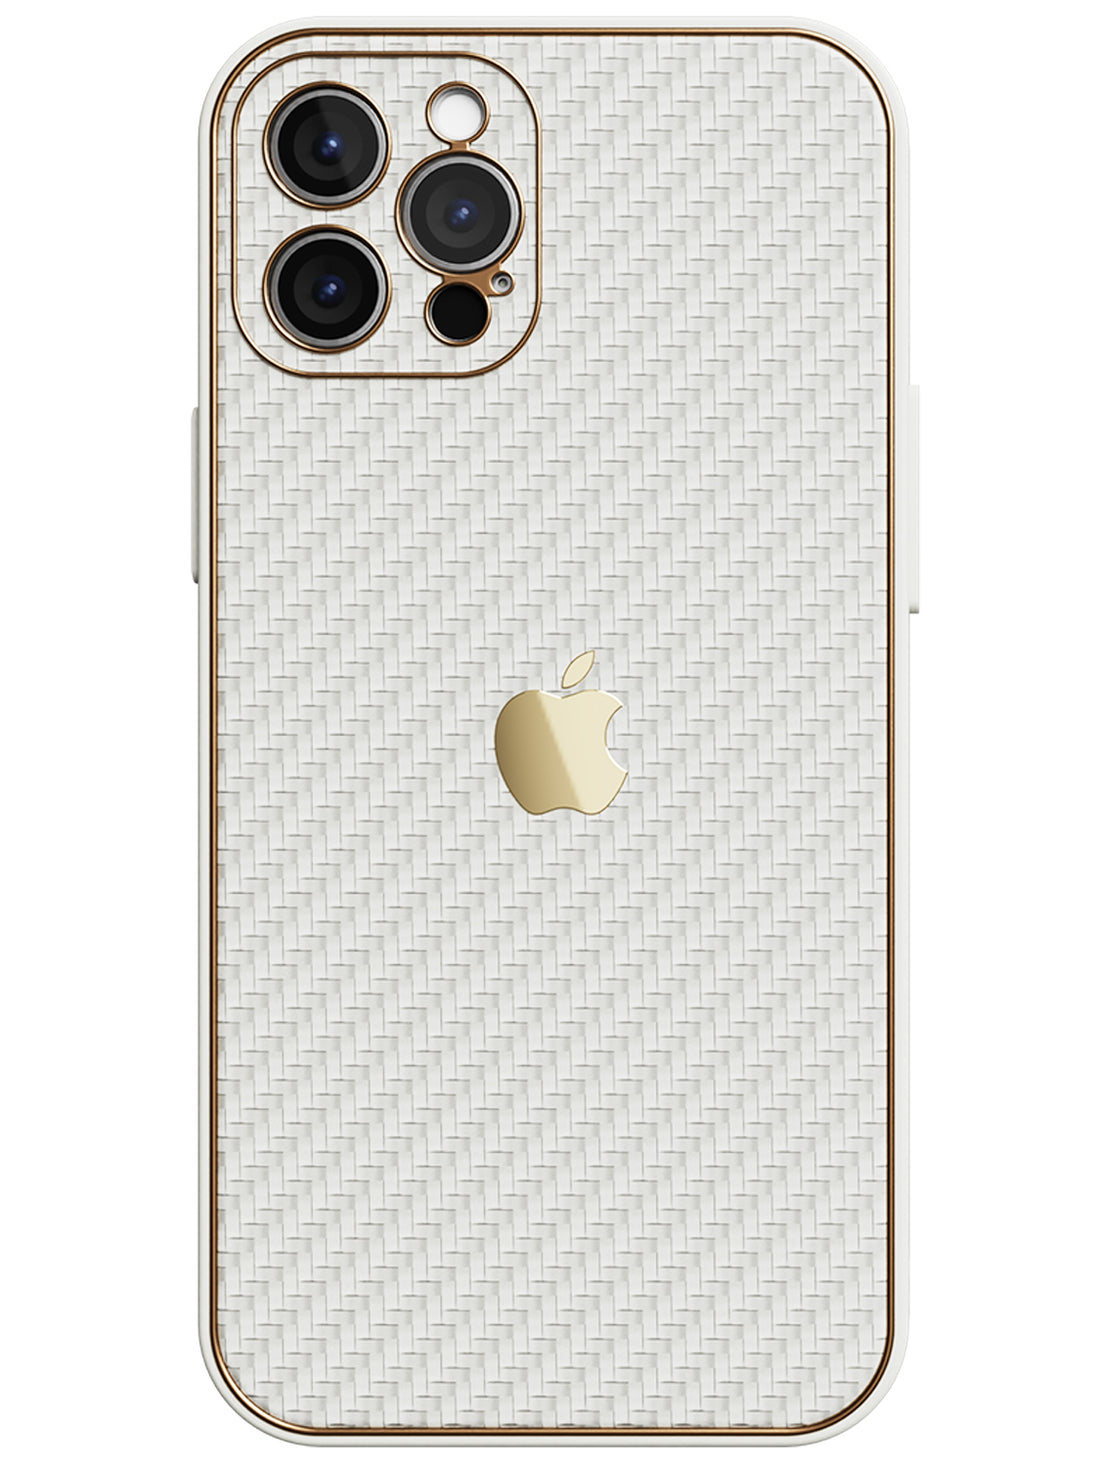 Carbon Leather Chrome Case - iPhone 12 Pro (White)